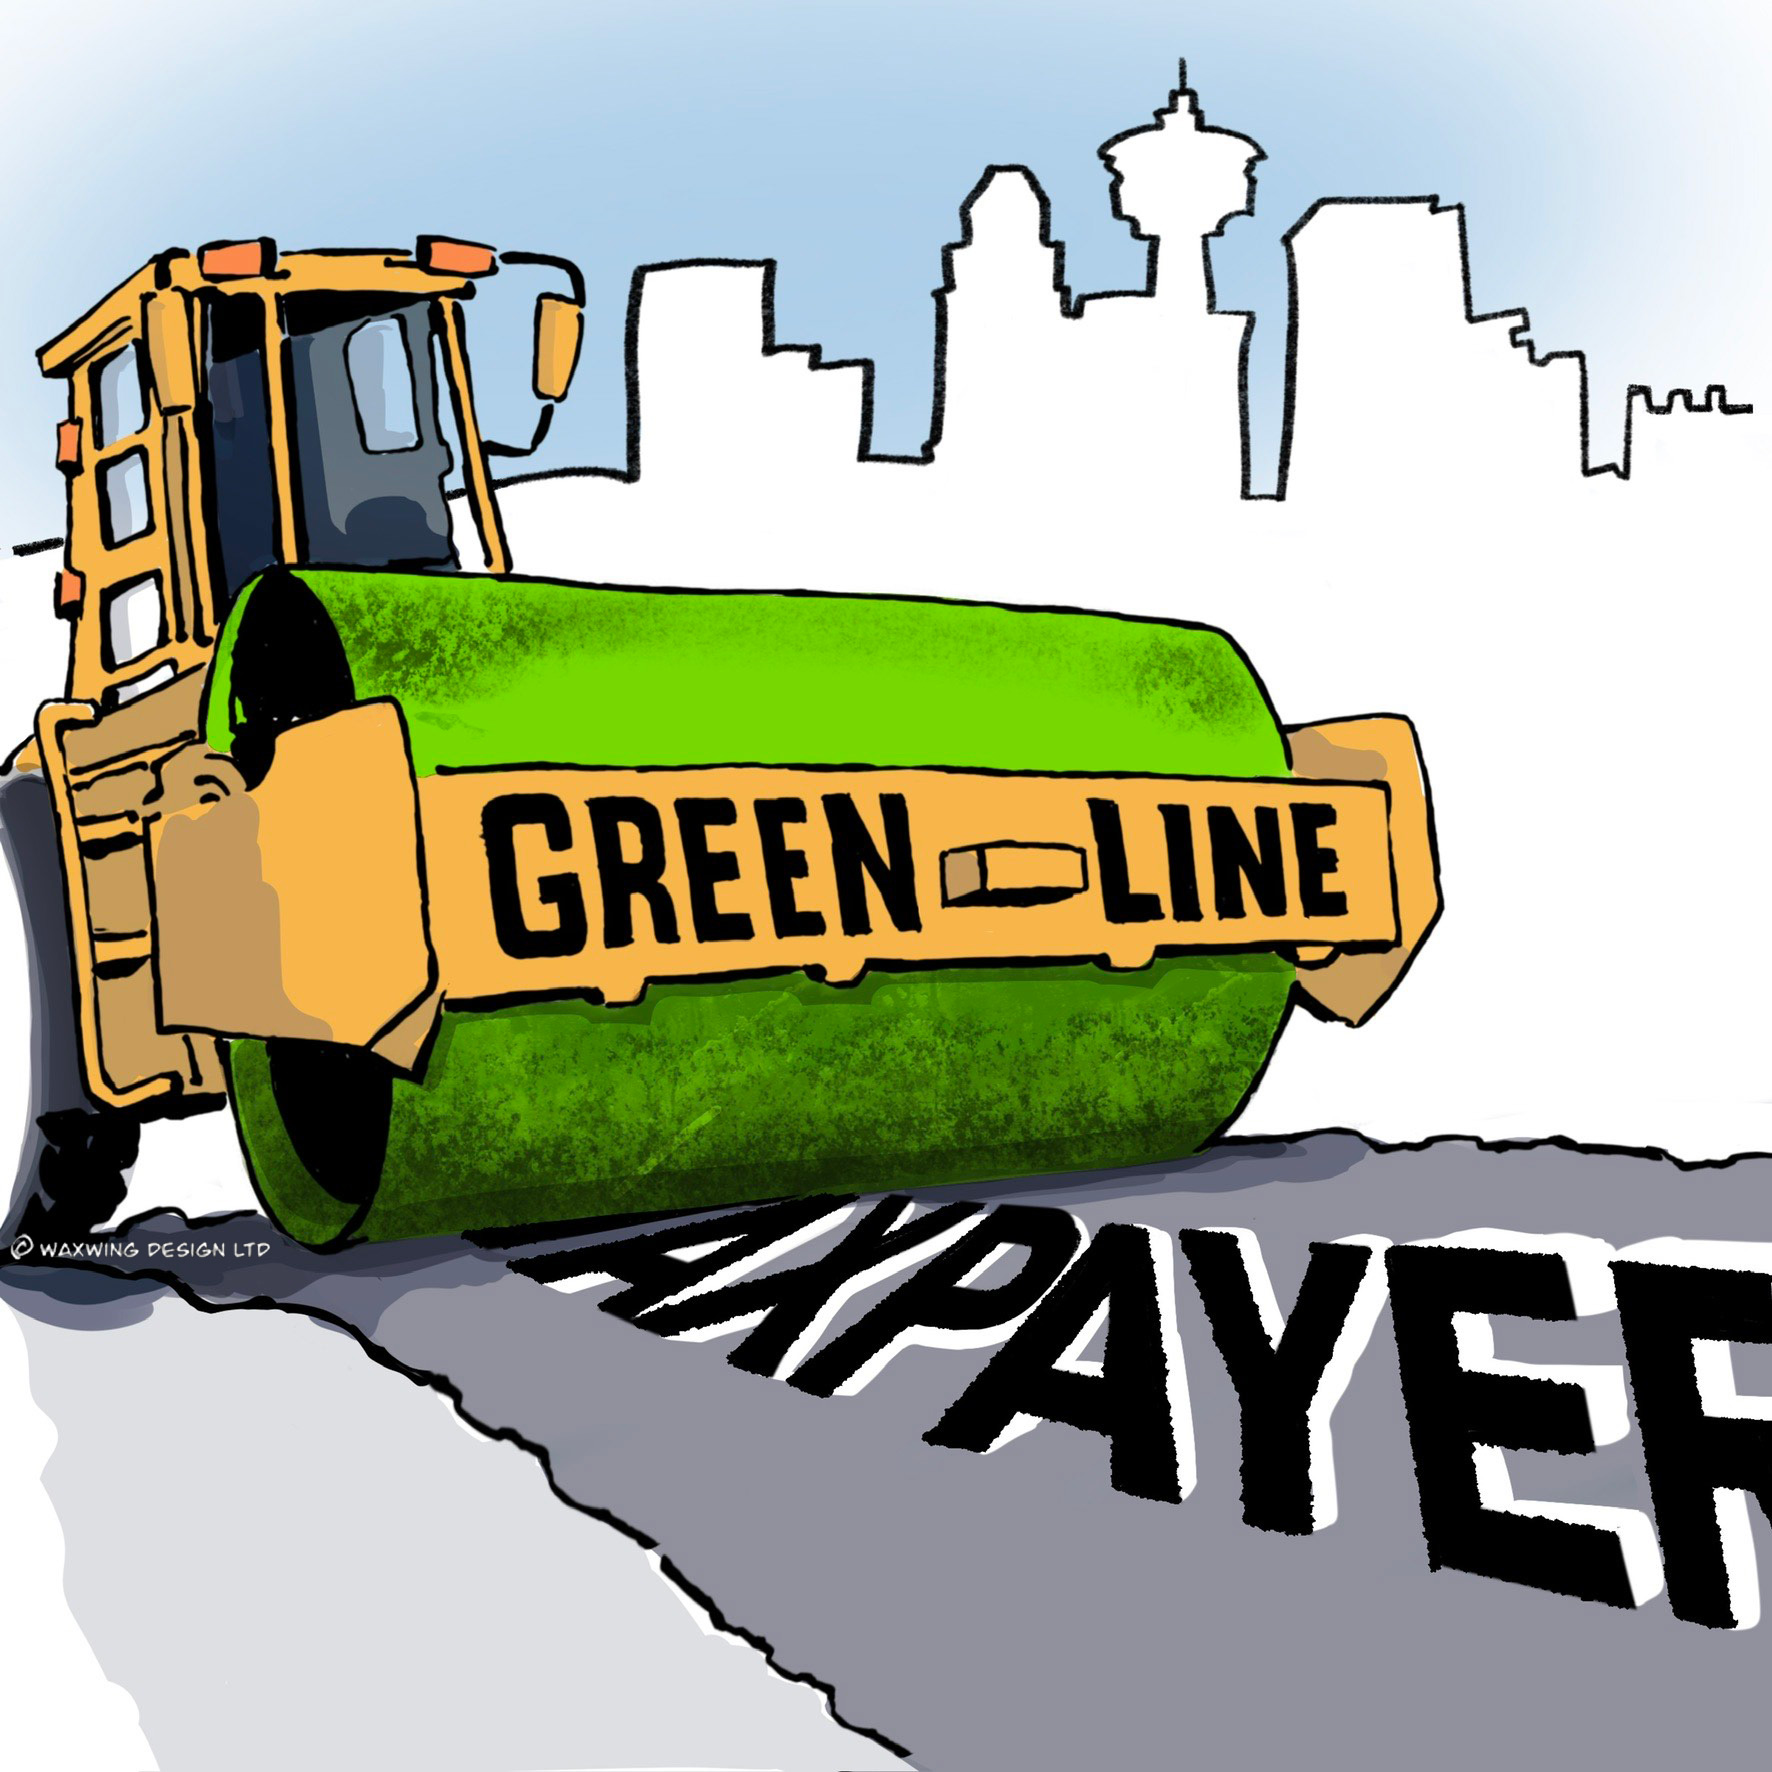 Editorial Cartoon: Steamroller and the taxpayer